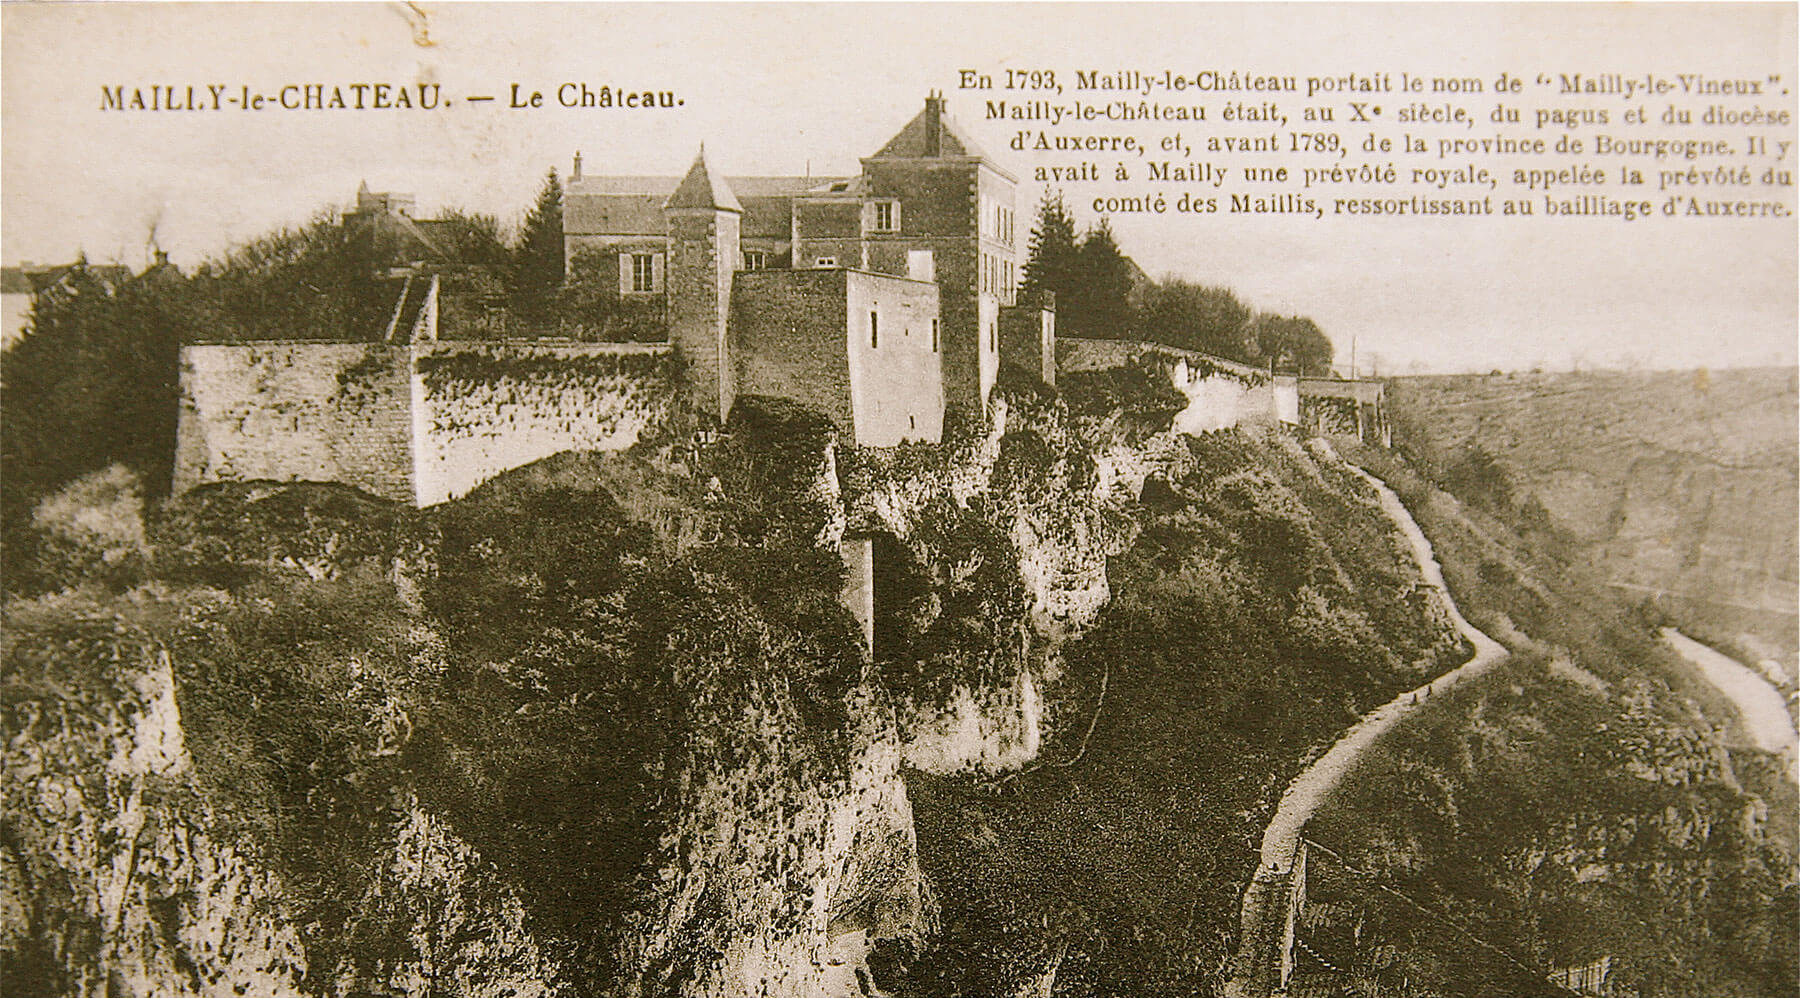 History of Chateau de Mailly